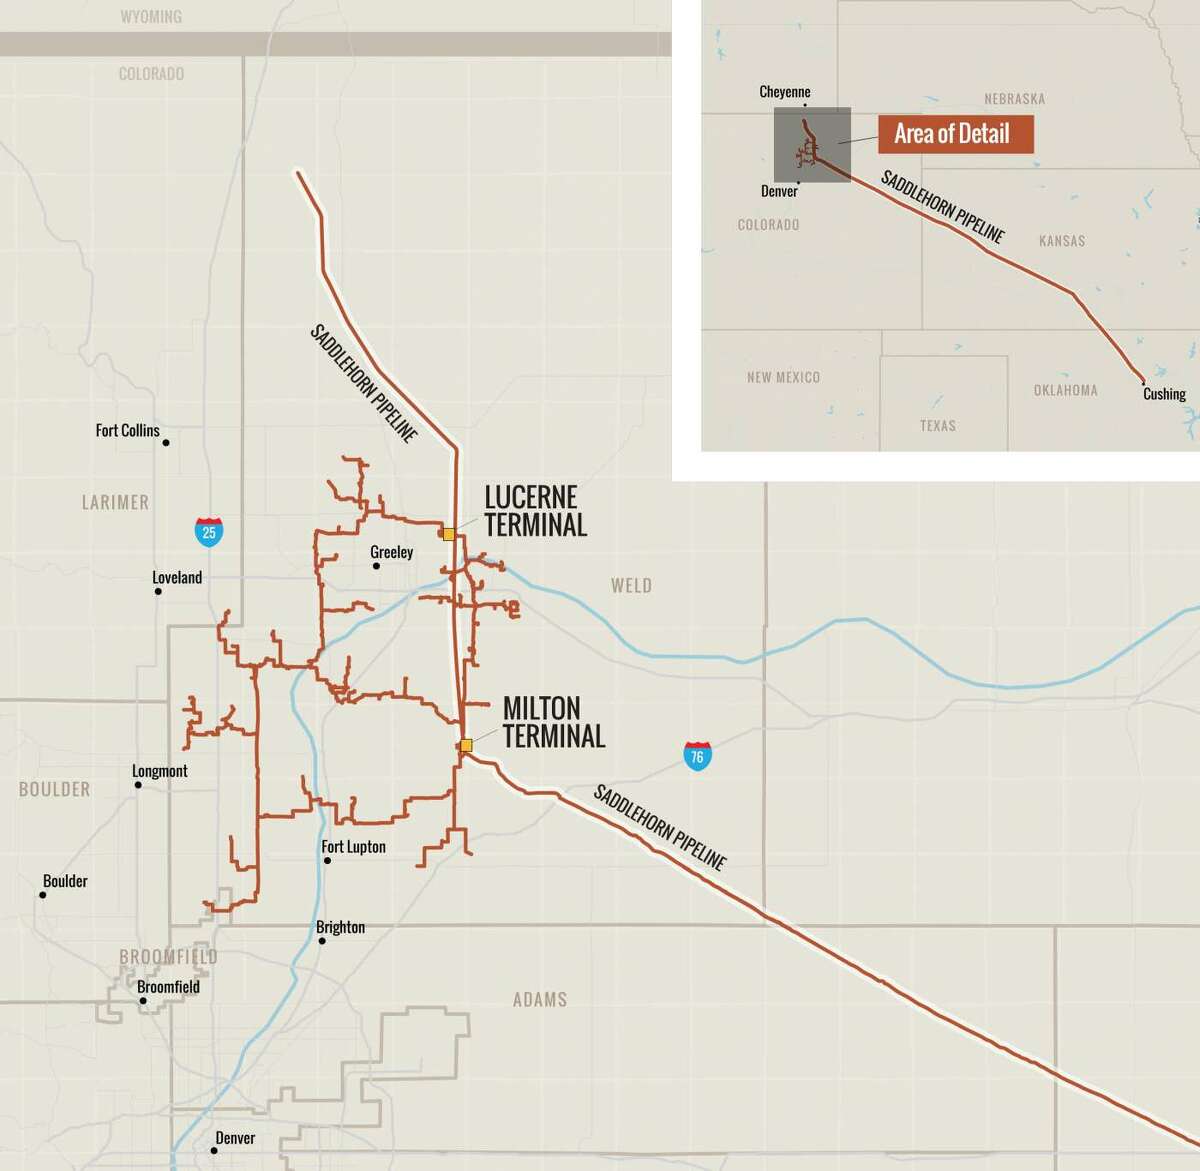 Black Diamond Gathering, a joint venture between Houston pipeline operators Noble Midstream Partners and Greenfield Midstream, is expanding its footprint in Colorado's DJ Basin.